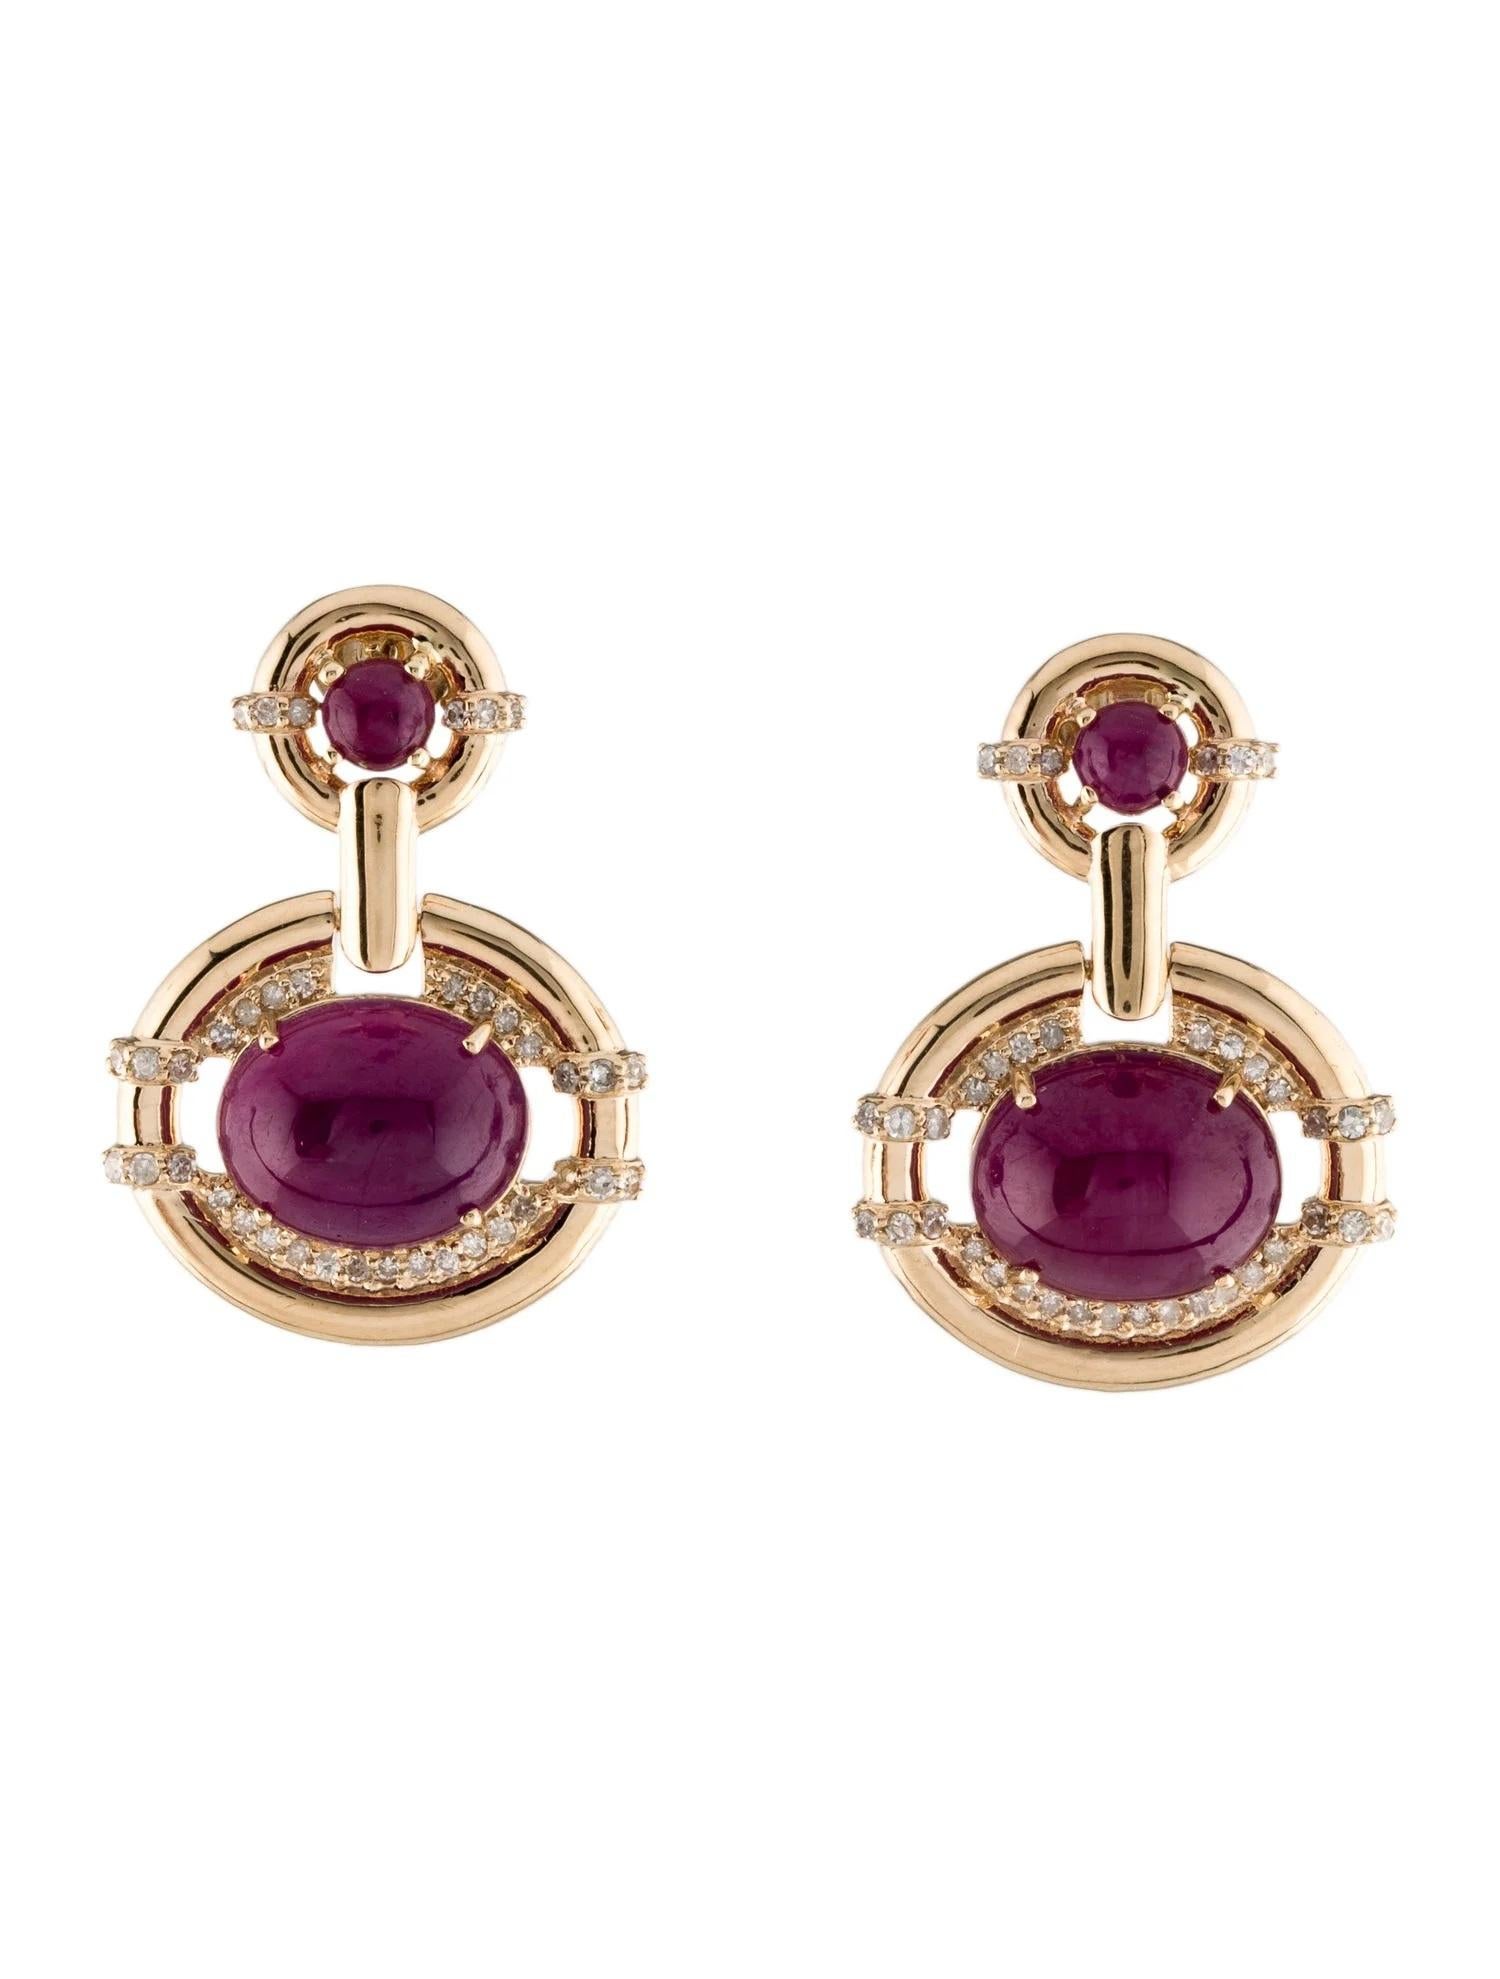 Round Cut 14K 13.24ctw Ruby & Diamond Drop Earrings, Cabochon Cut, Red Stones, Near Colorl For Sale